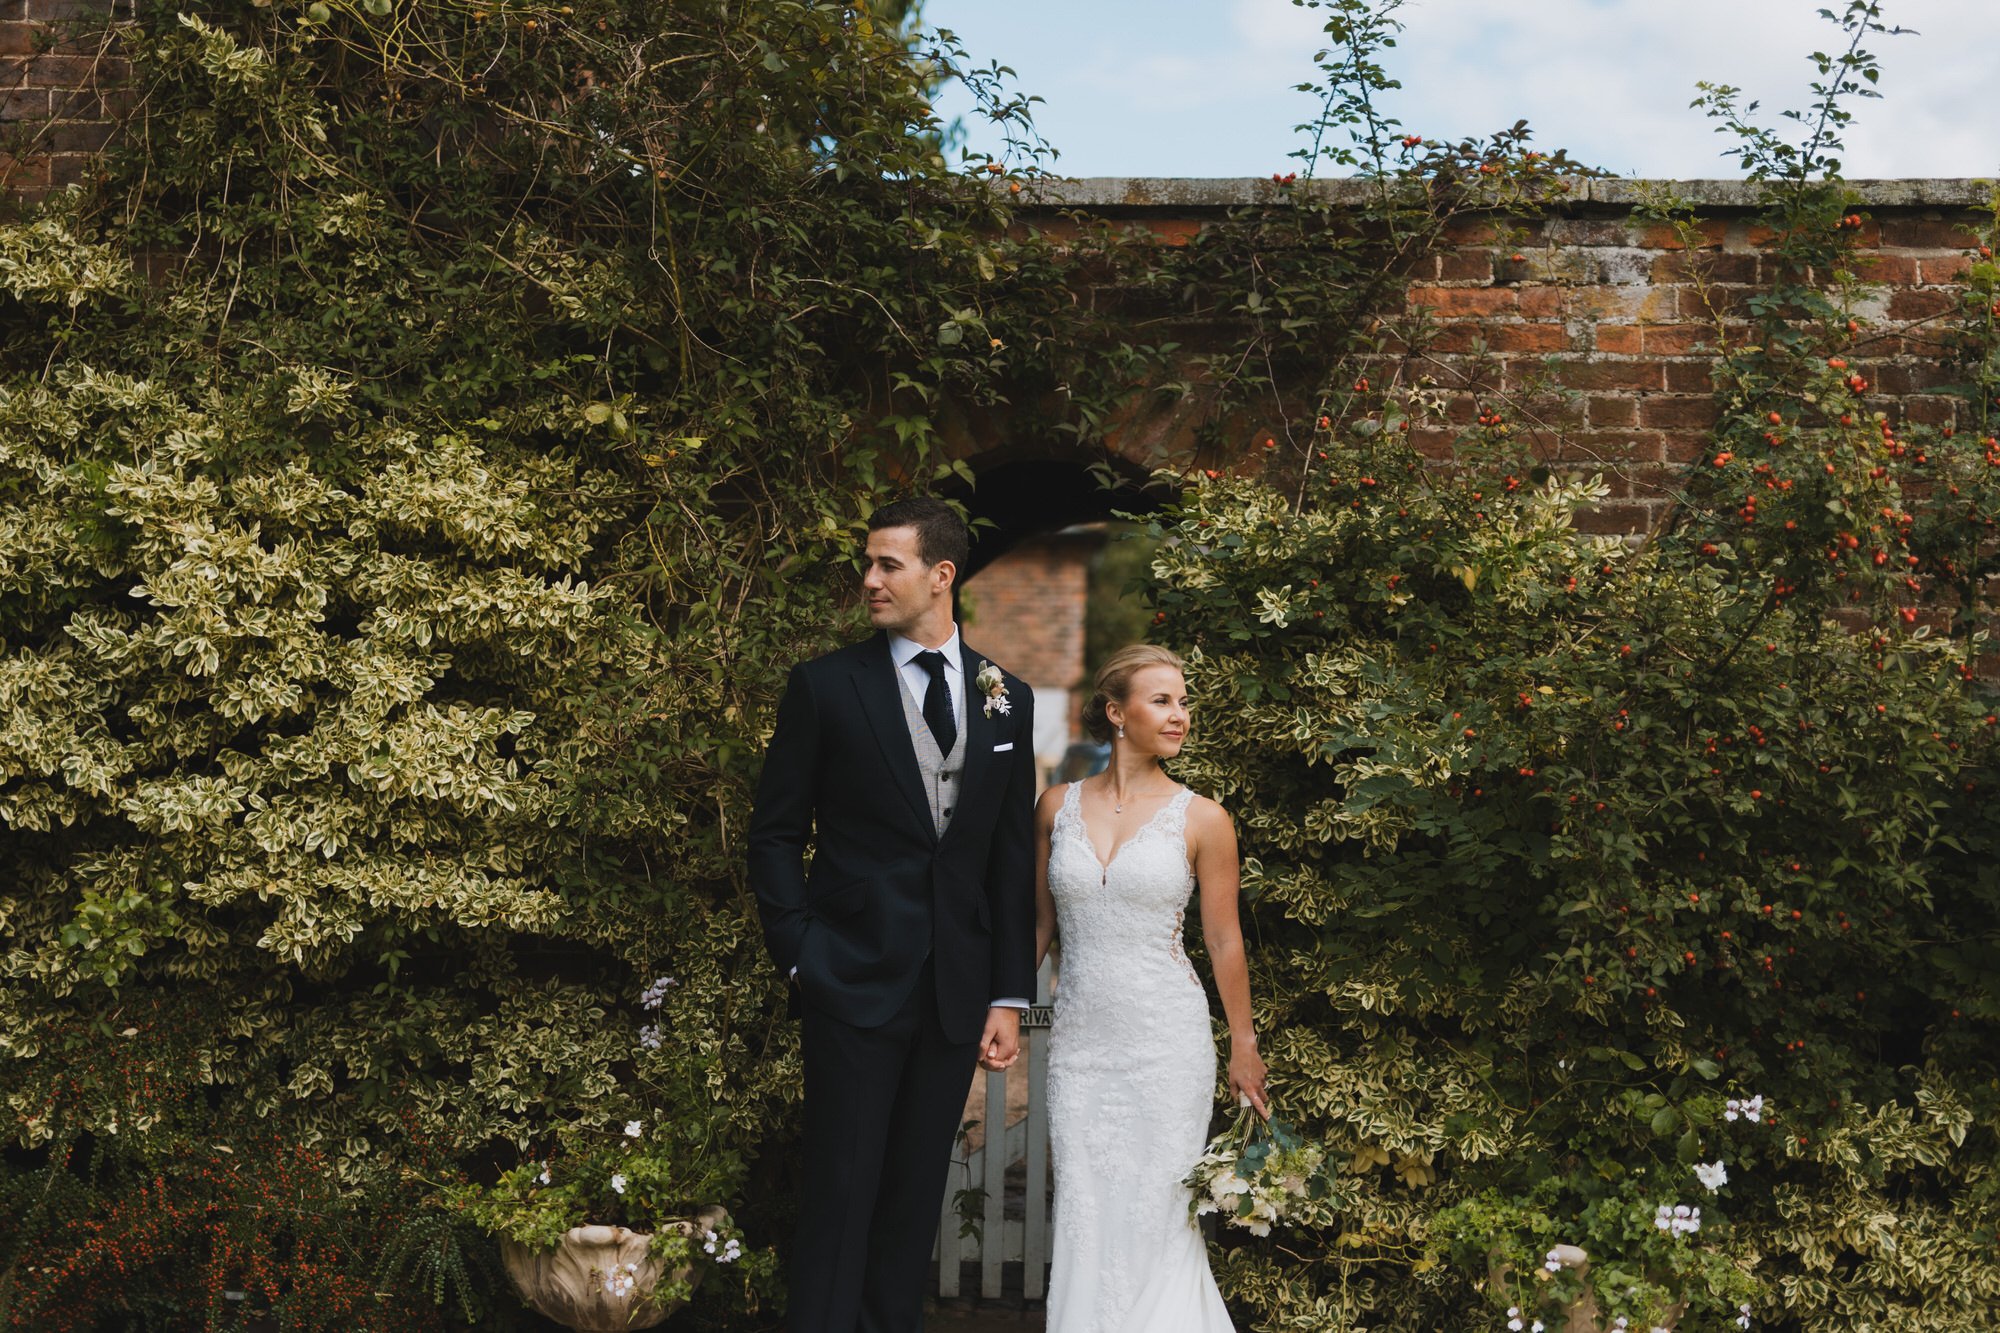 wootton hall wedding photographers in lincolnshire9.jpg